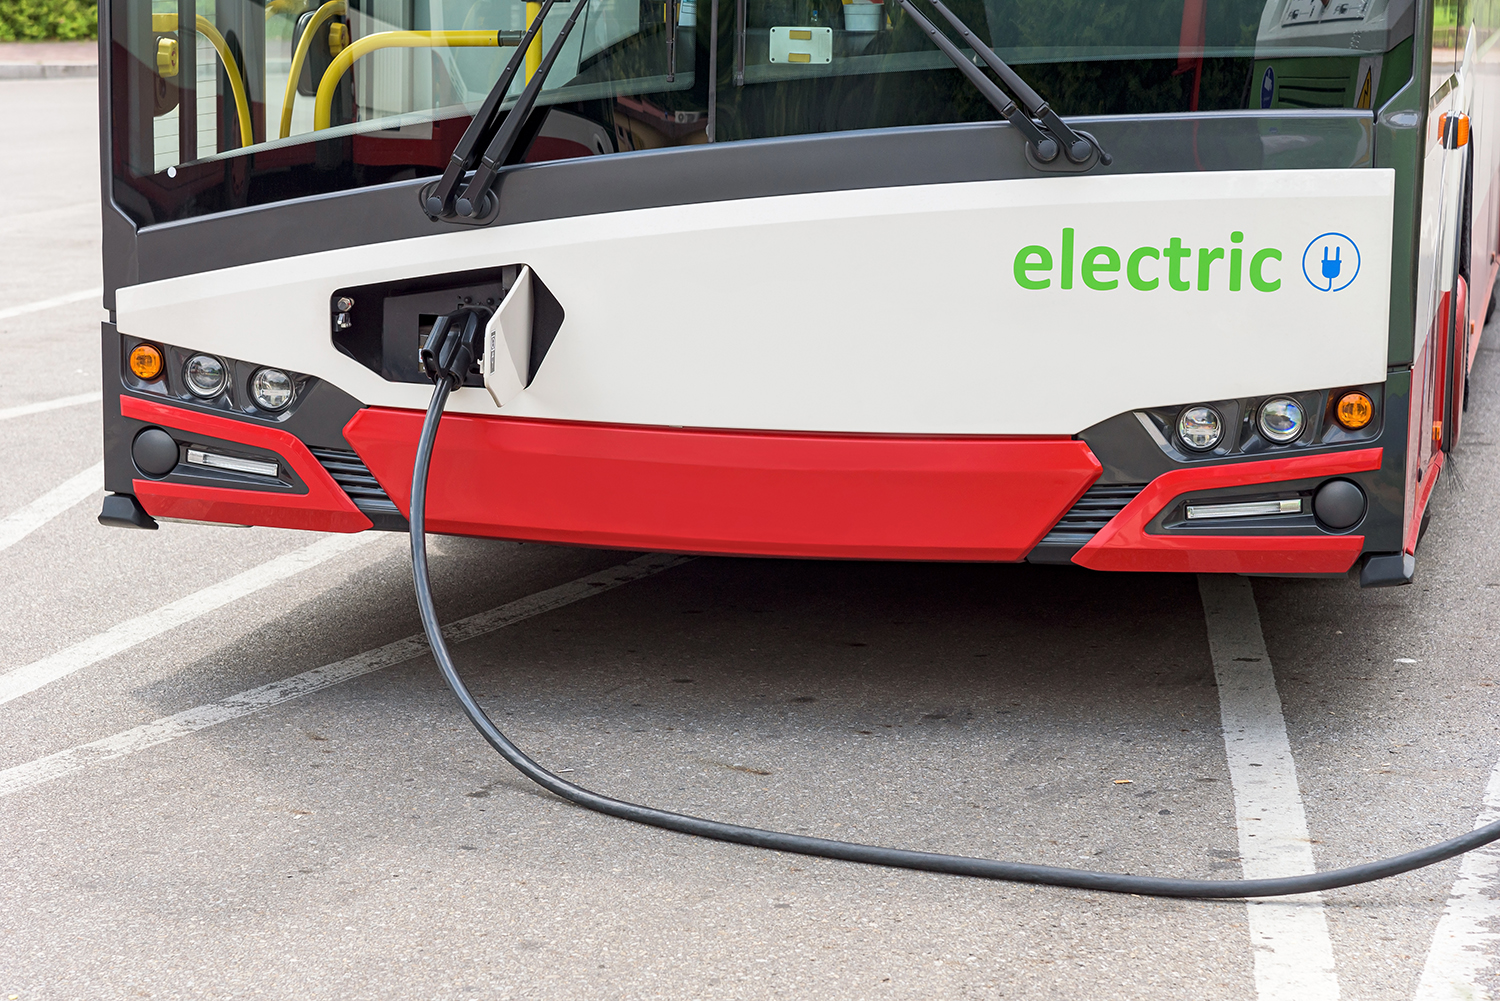 electric bus being charges